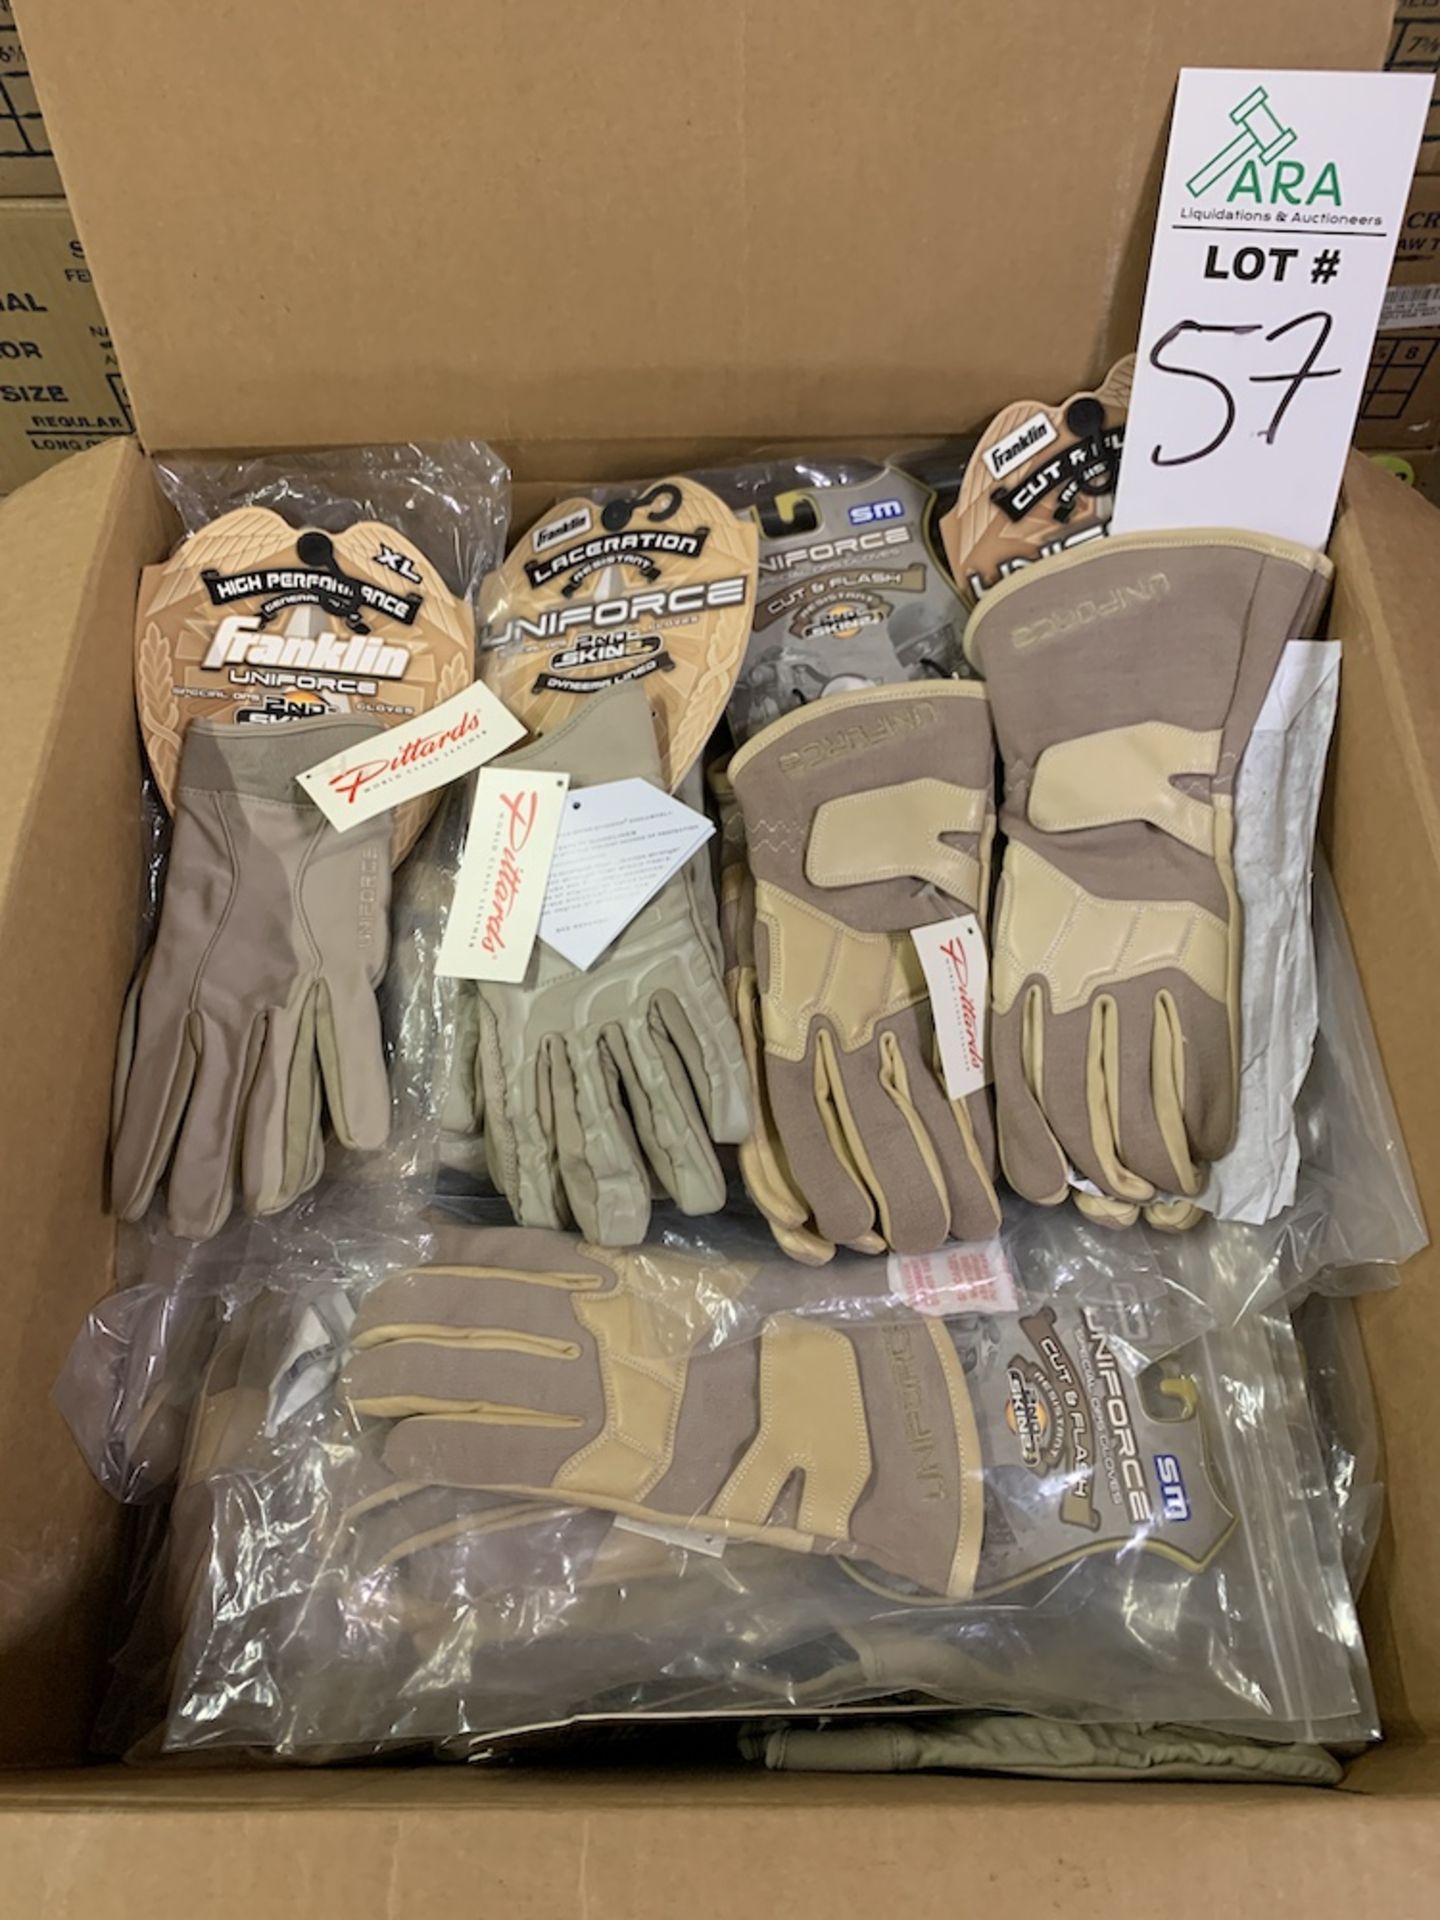 45 Pairs Franklin Uniforce Gloves, High Performance 2nd Skin2 "Special Ops" Sml, 4 Tan Styles, New